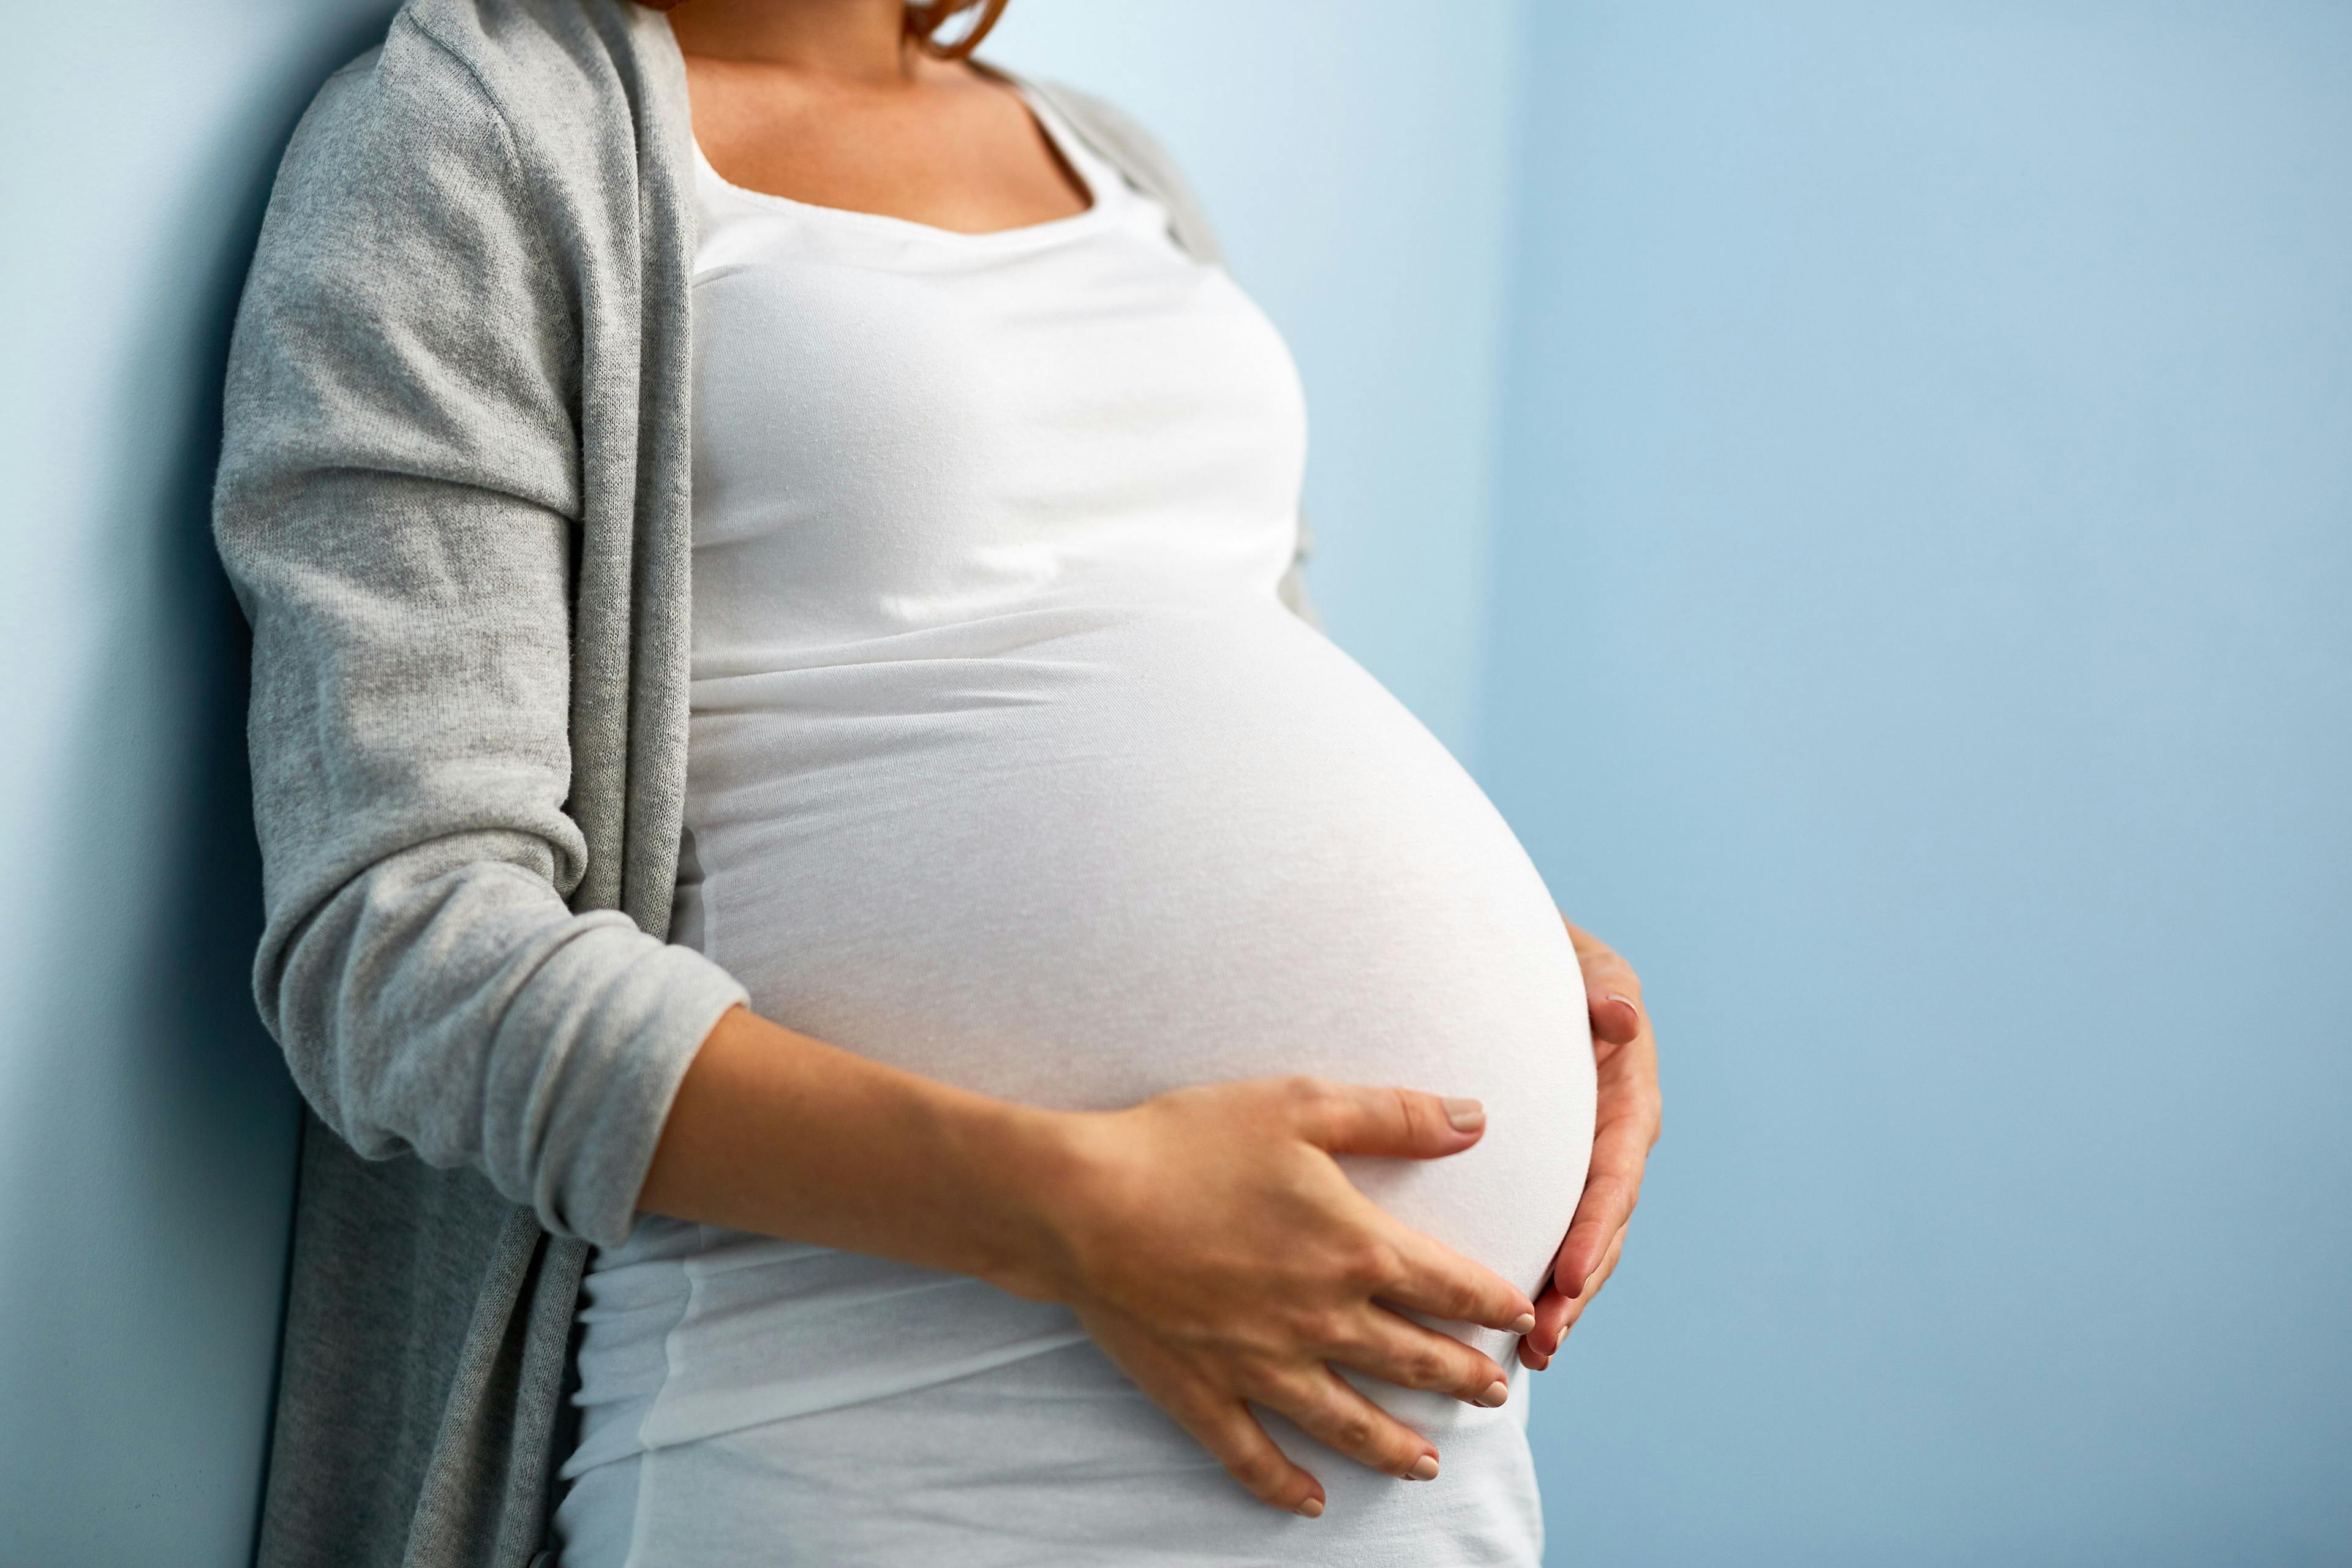 Automated Insulin Delivery Could Help Pregnant Women With T1D Improve Glycemic Control